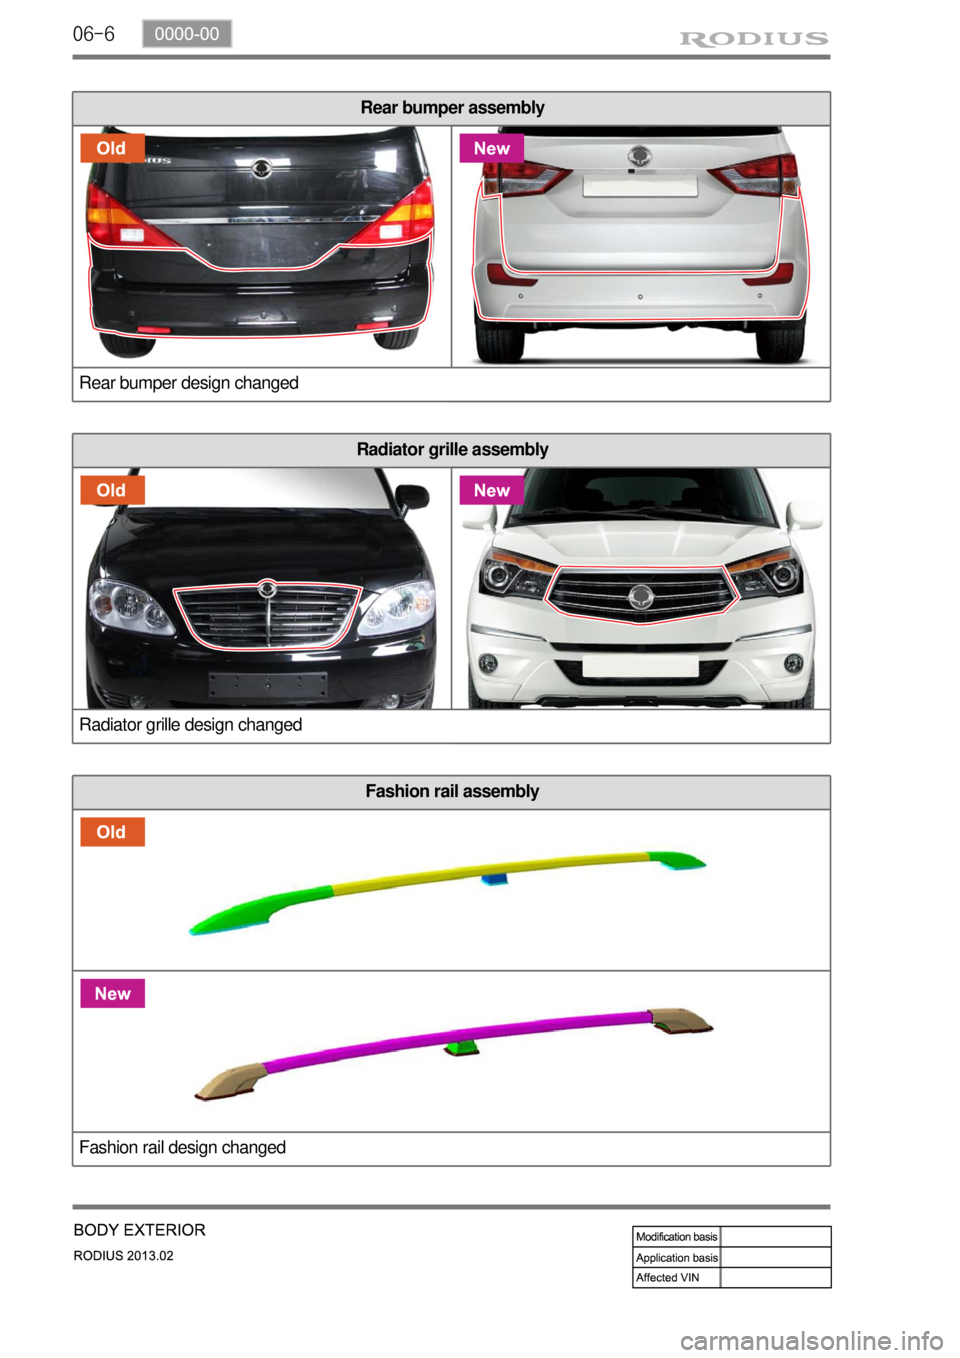 SSANGYONG TURISMO 2013  Service Manual 06-6
Radiator grille assembly
Radiator grille design changed
Rear bumper assembly
Rear bumper design changed
Fashion rail assembly 
Fashion rail design changed 